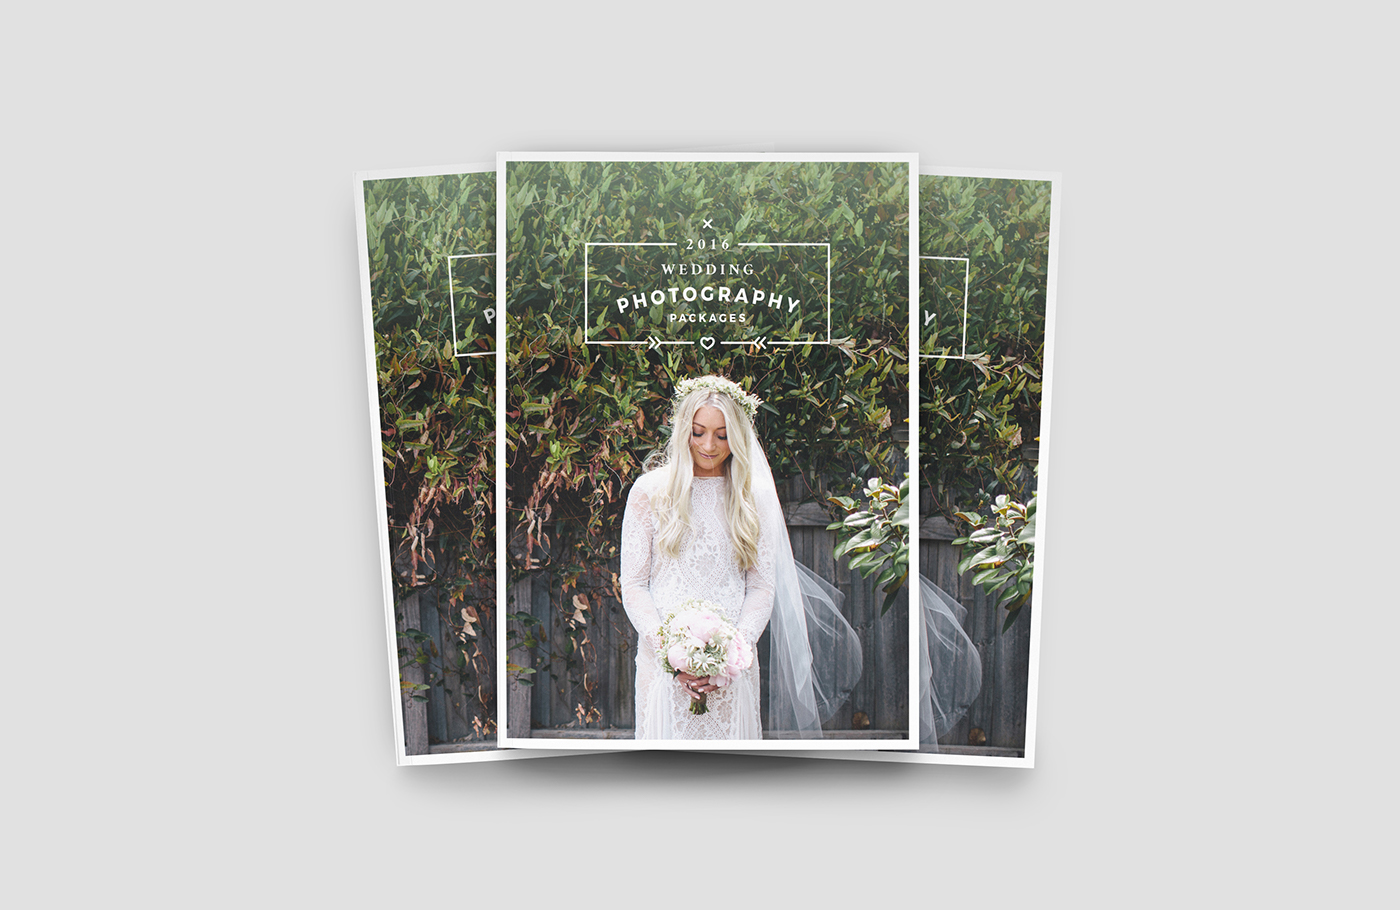 photography brochure Wedding Photography wedding planning brochure photography portfolio photographers packages brochure photography pricelist modern magazine template wedding packages magazine template best magazines wedding template